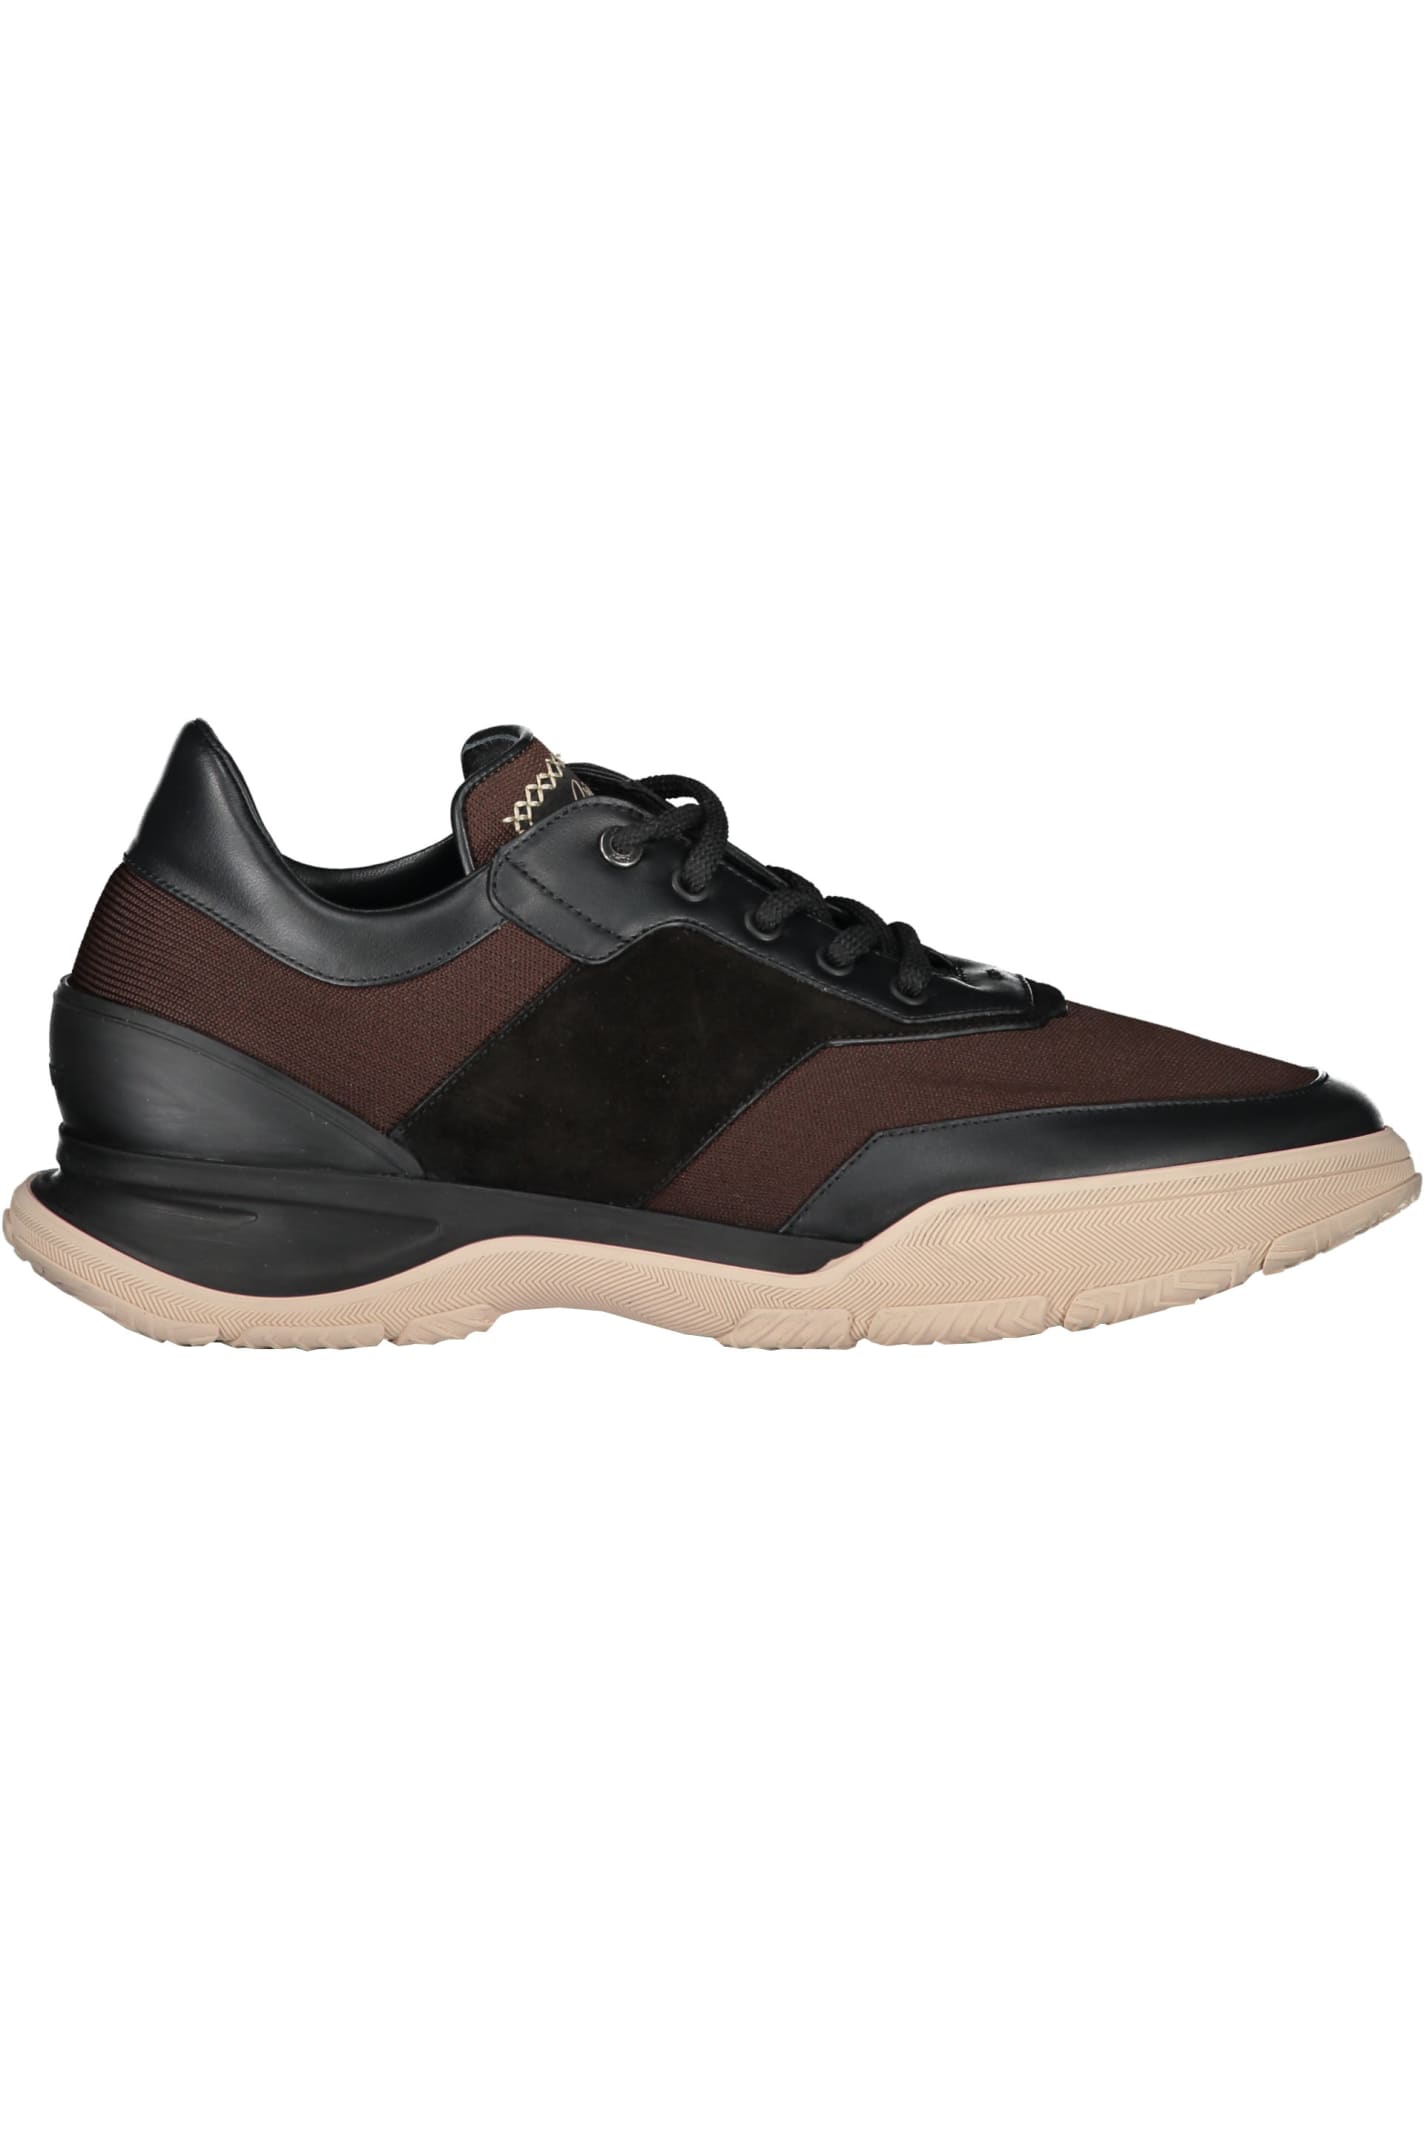 Brioni Leather Sneakers In Brown